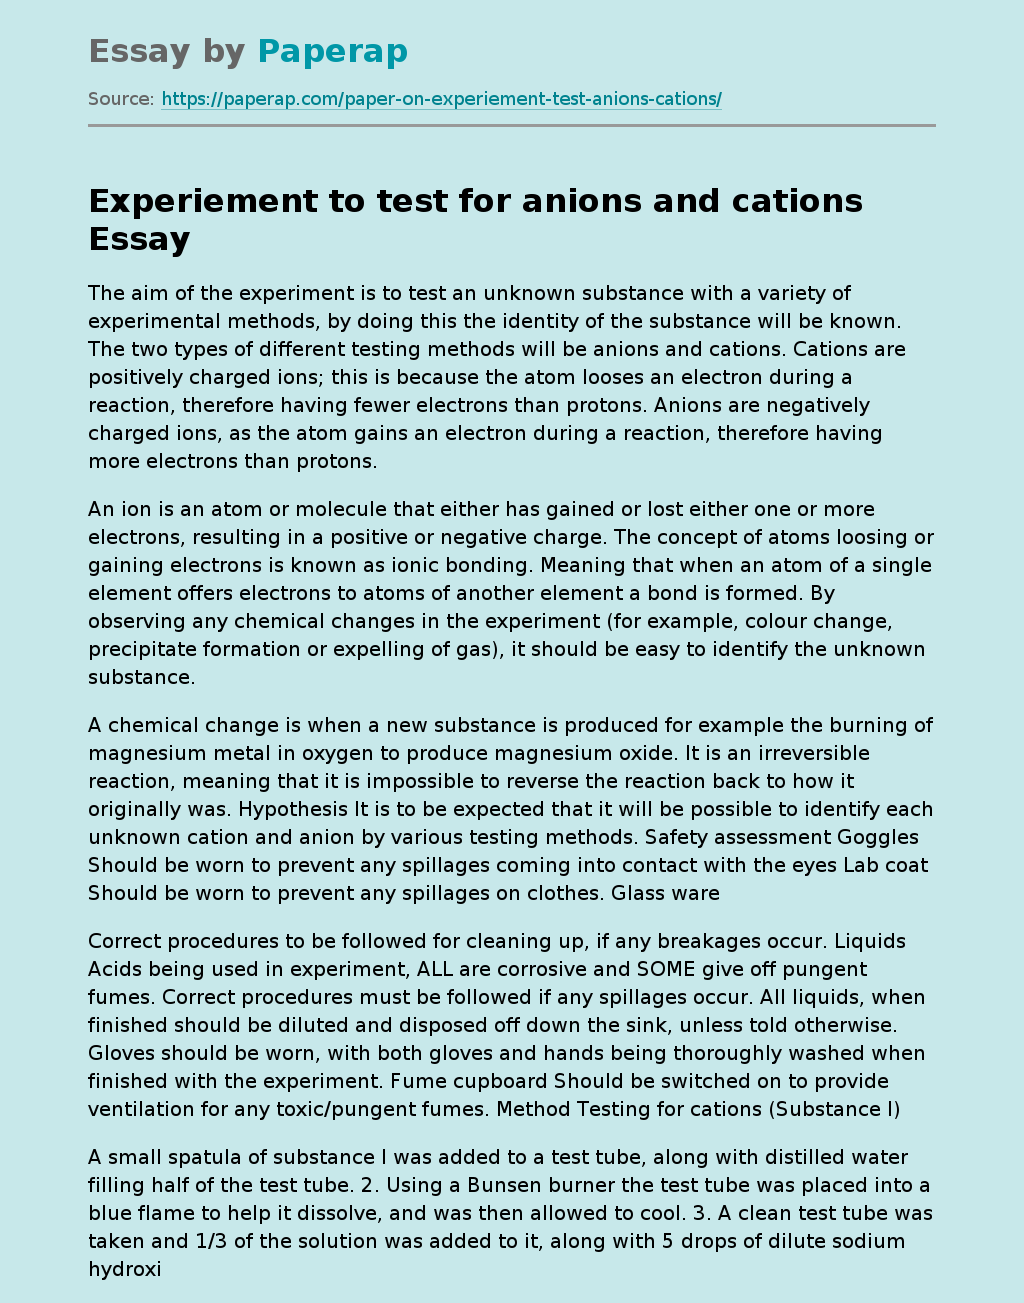 Experiement to test for anions and cations